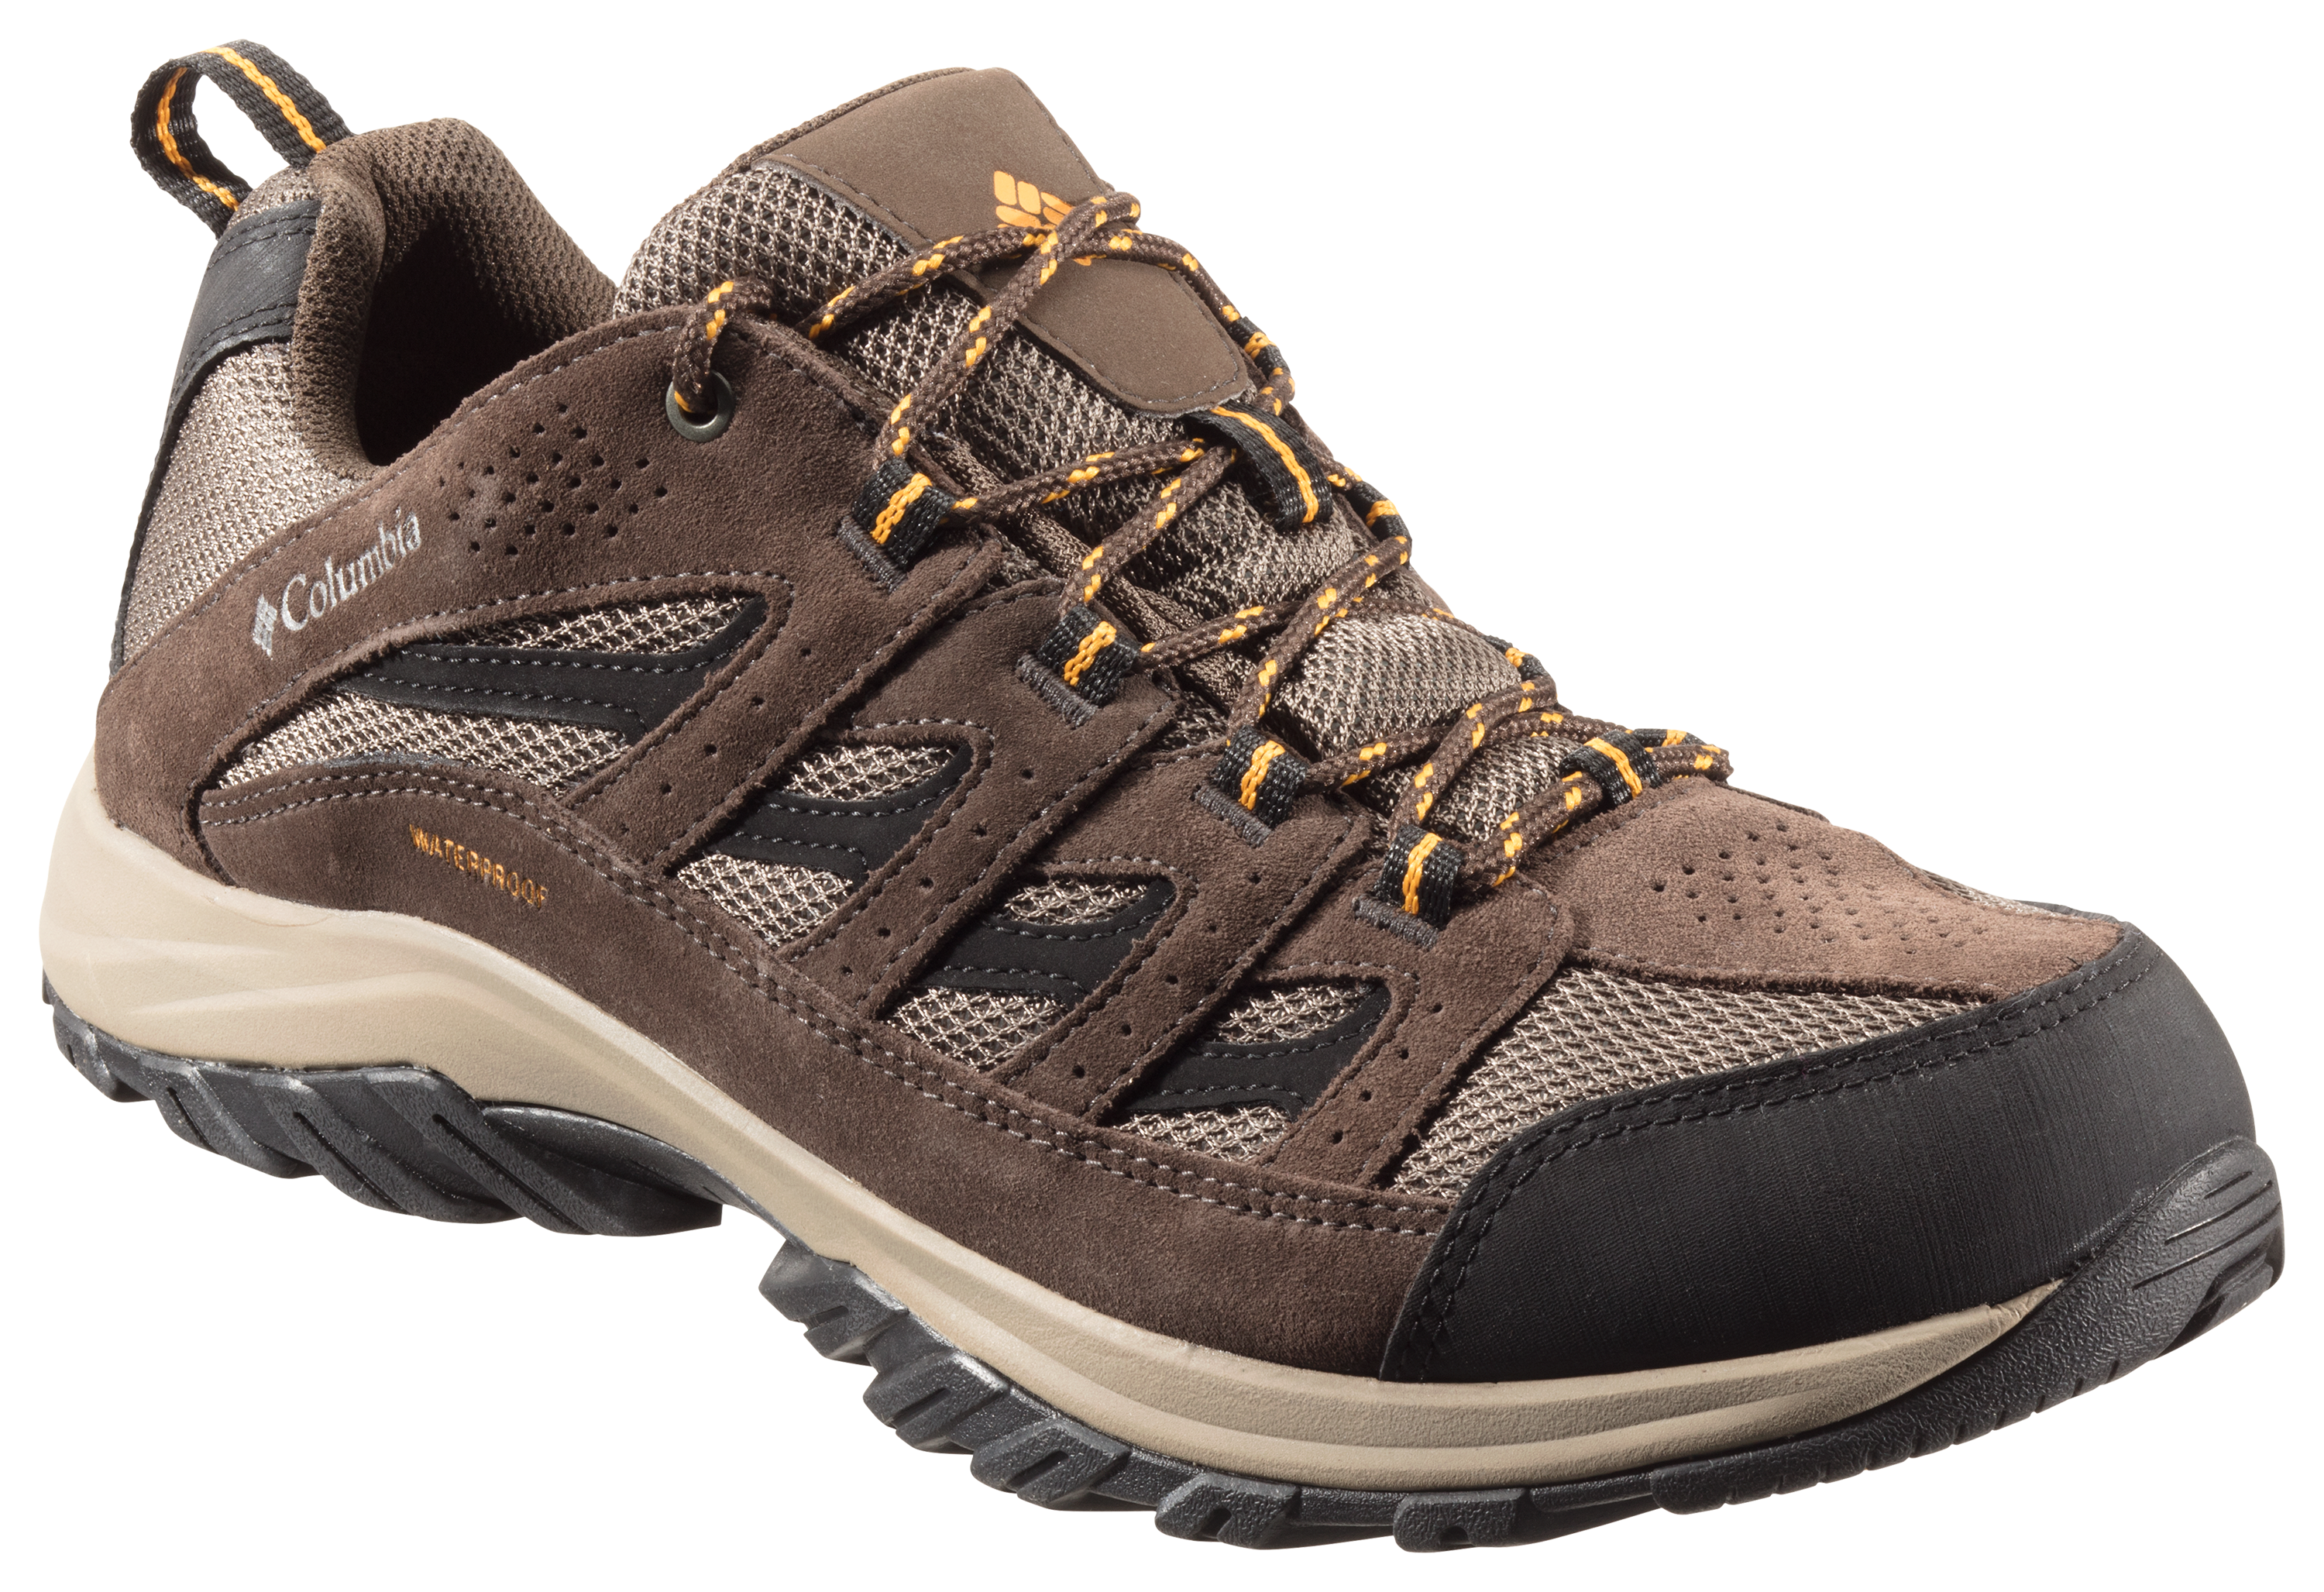 Columbia Crestwood Waterproof Hiking Shoes for Men | Bass Pro Shops